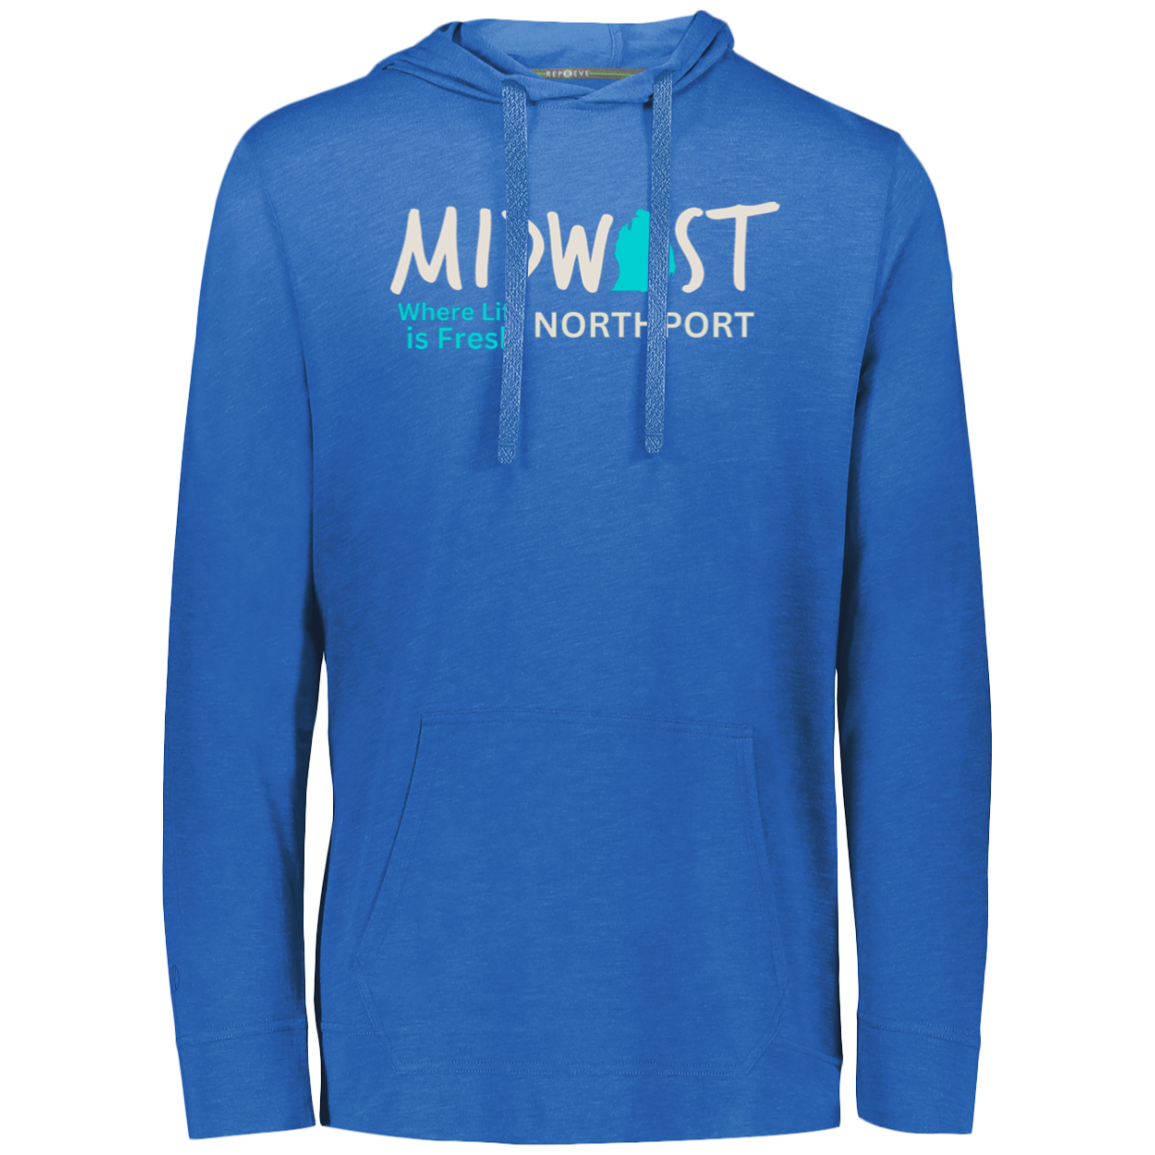 Midwest Where Life is Fresh Northport Eco Lightweight Hoodie